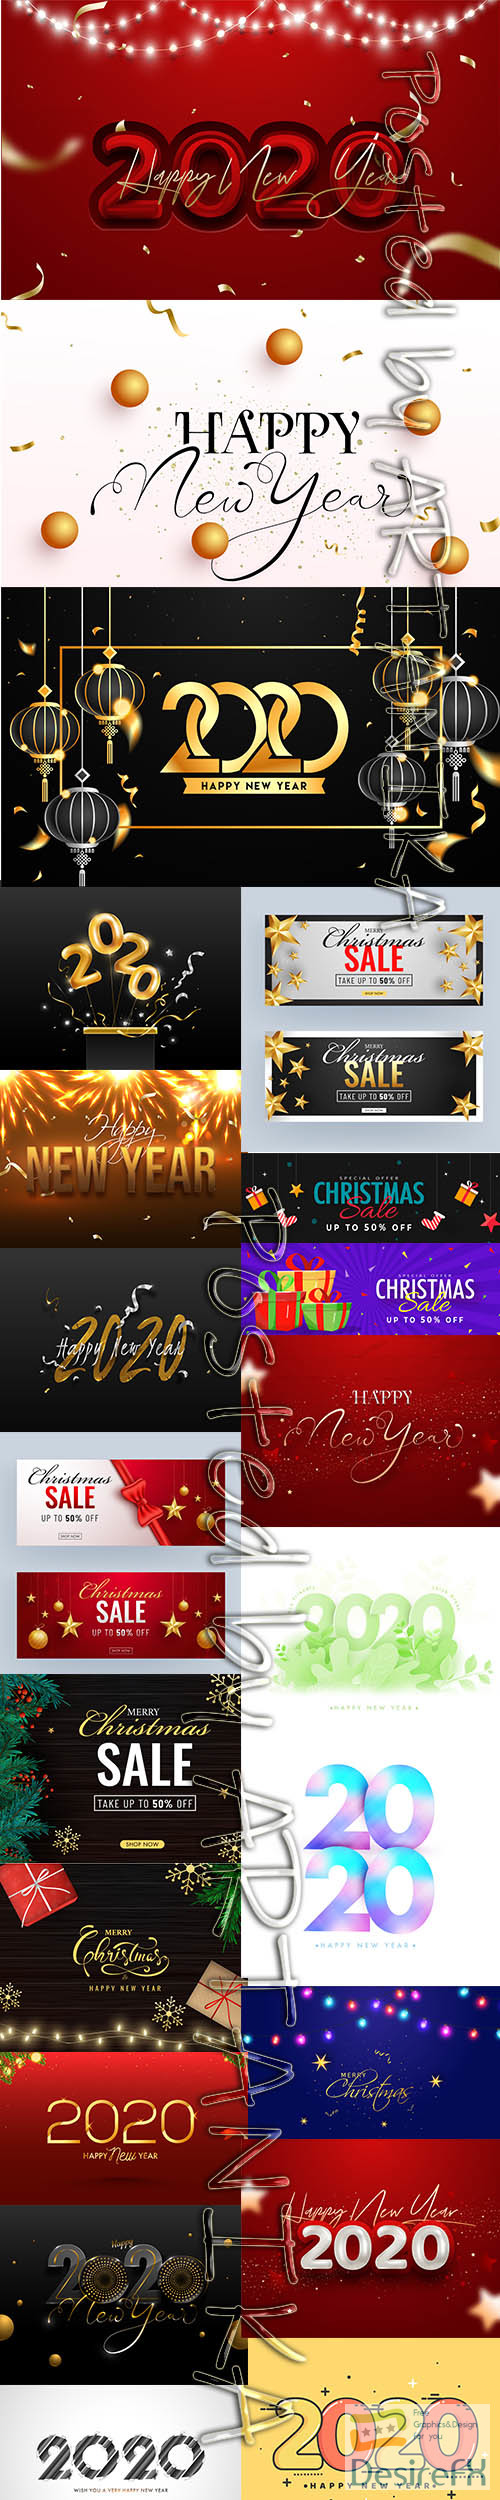 Happy New Year 2020 Illustration and Christmas Backgrounds Set